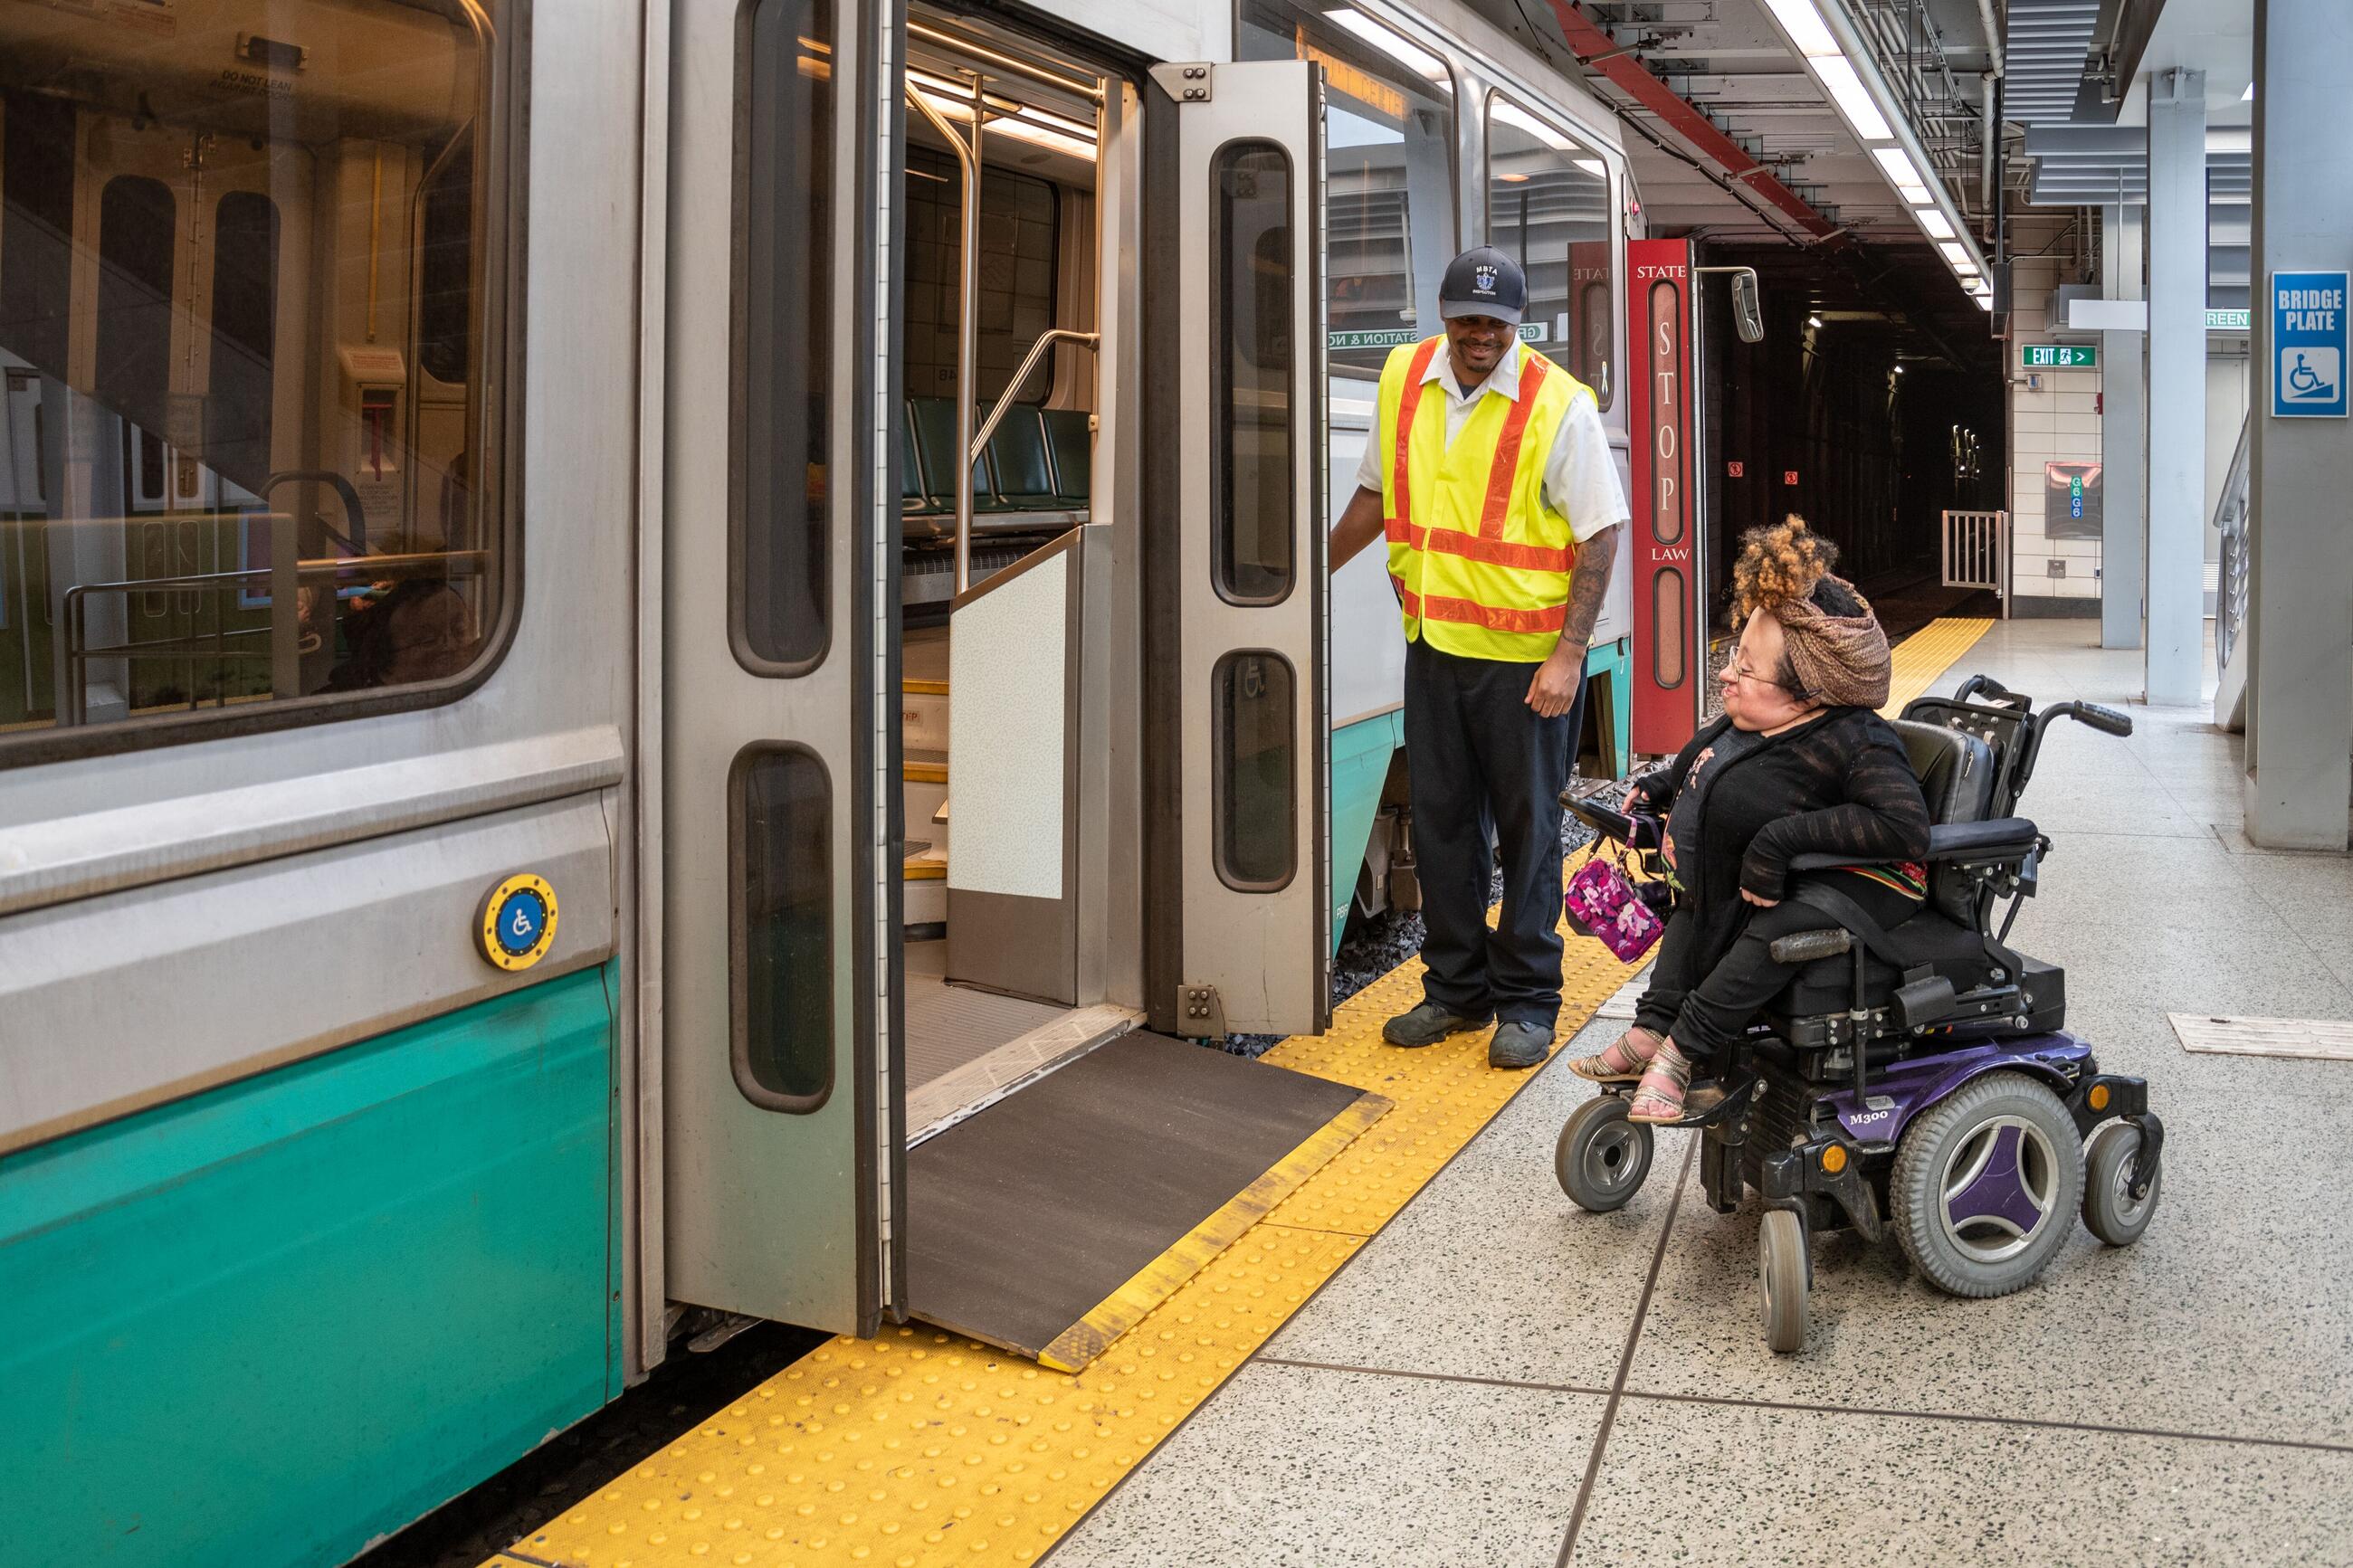 On the Green Line, an operator stands by the doors, as the bridge plate allows a rider in a wheeled mobility device to board